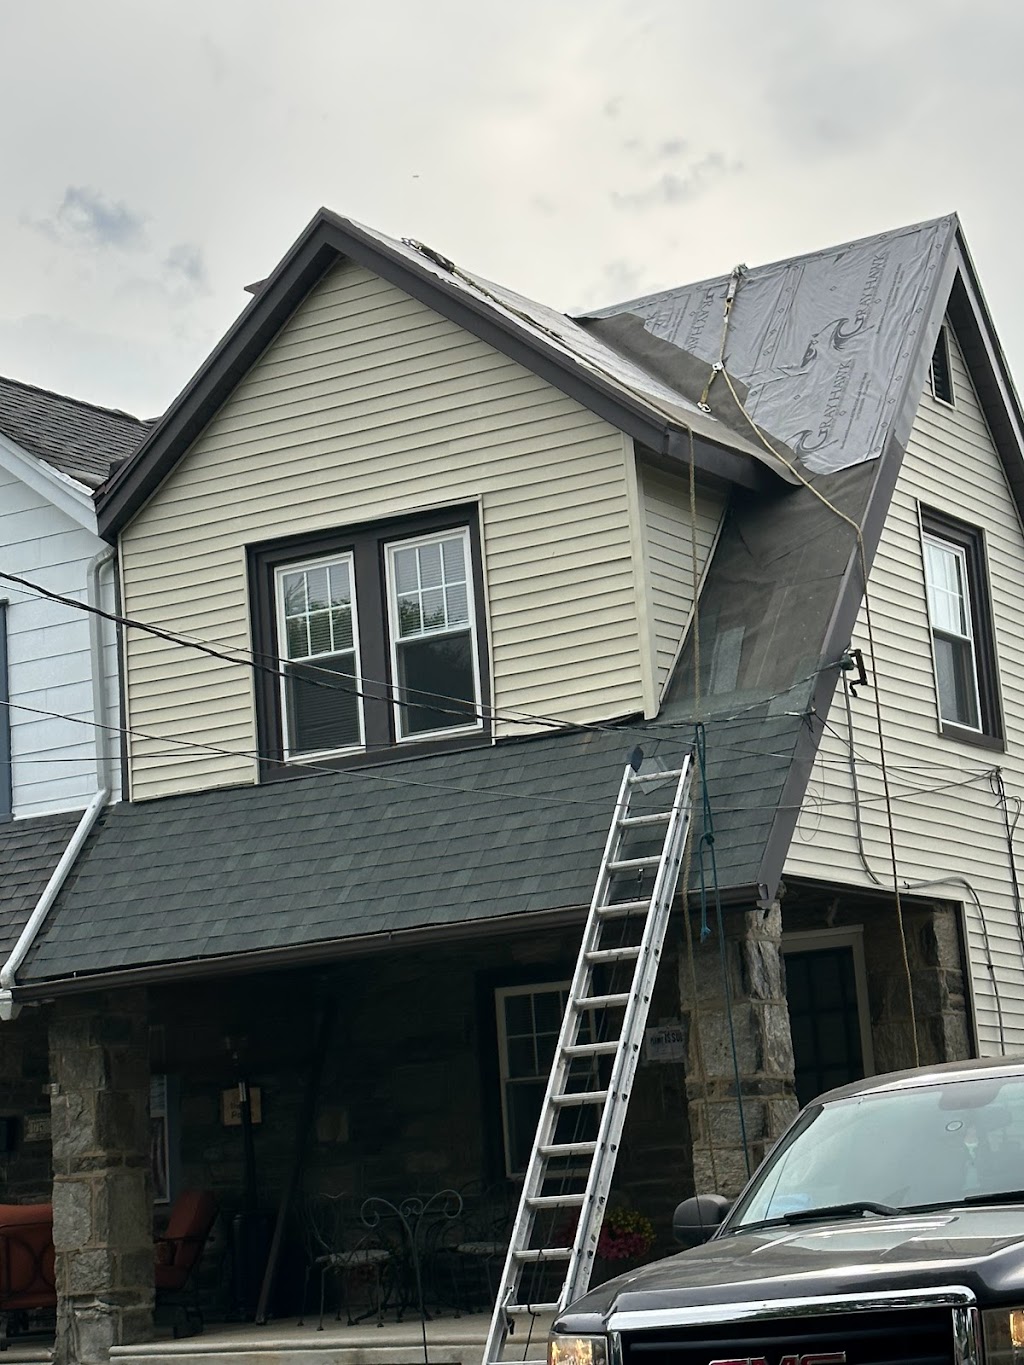 Manny Roofing Contractor Inc | 612 Littlecroft Rd, Upper Darby, PA 19082 | Phone: (267) 575-3503